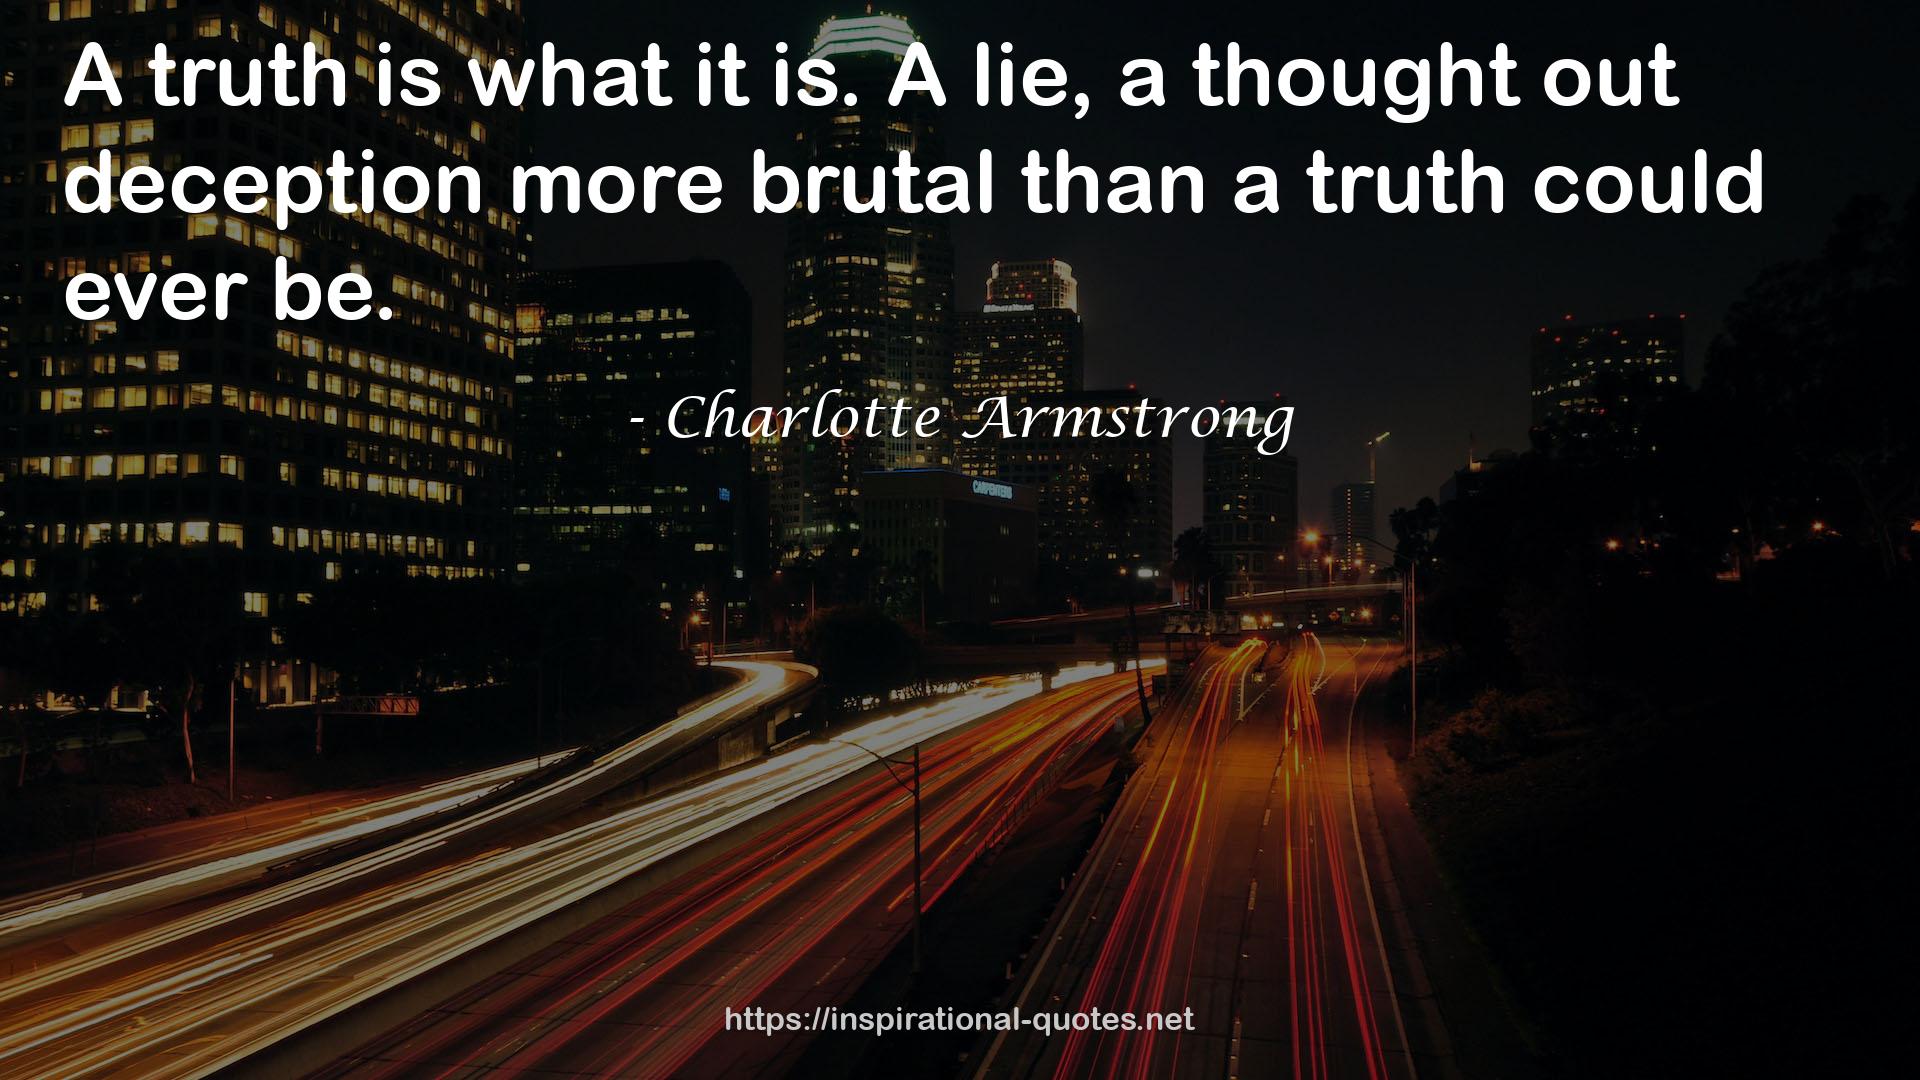 Charlotte Armstrong QUOTES